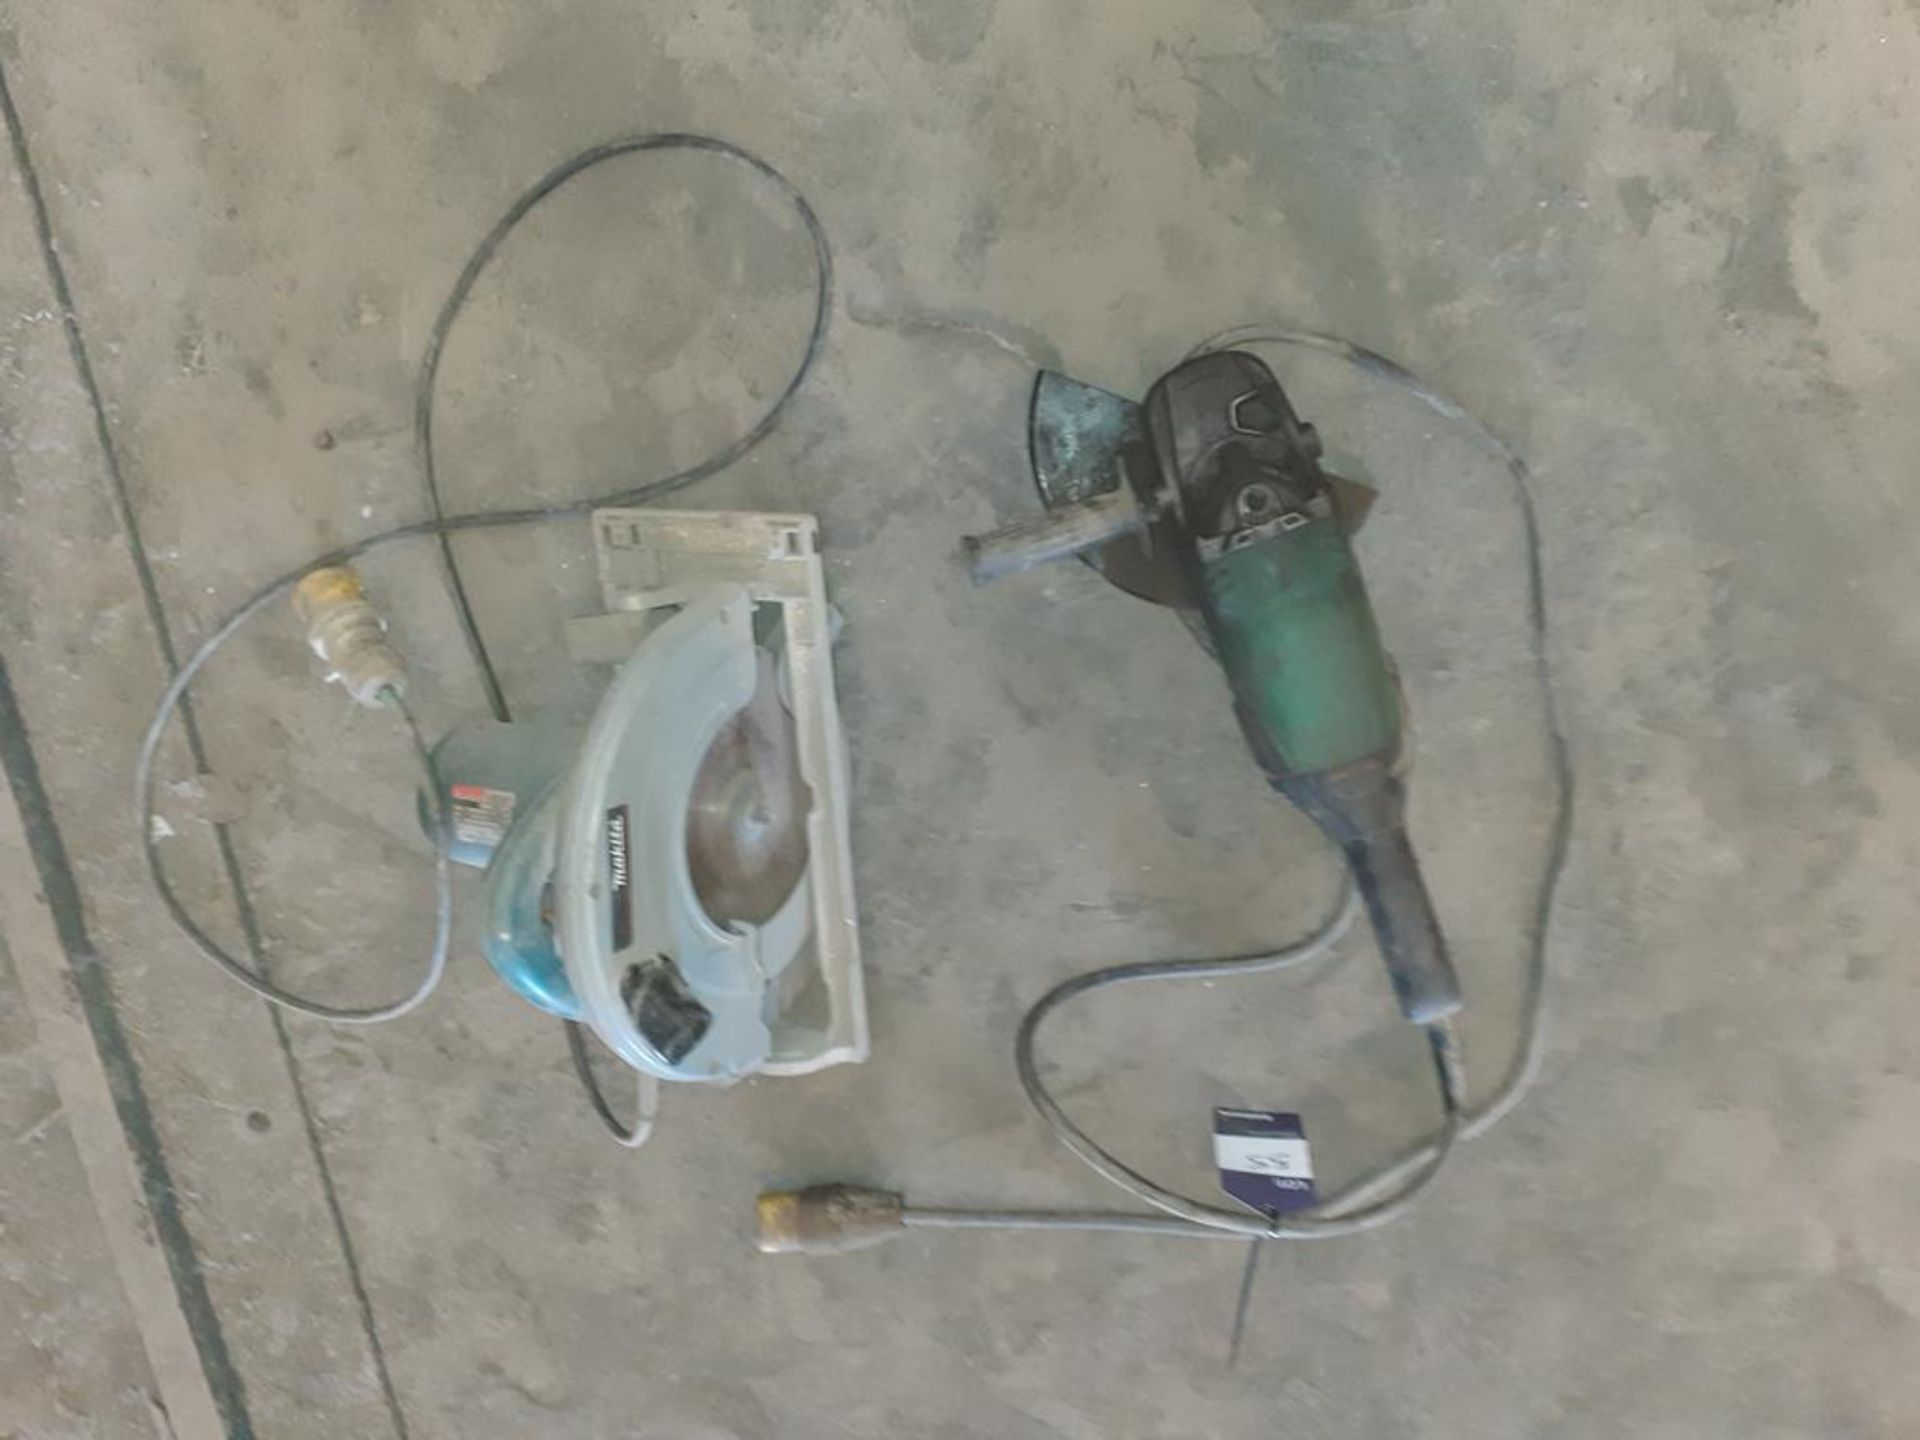 Makita 9" side grinder and Makita 5903R circular saw 110 volt. This lot is Buyer to Remove.